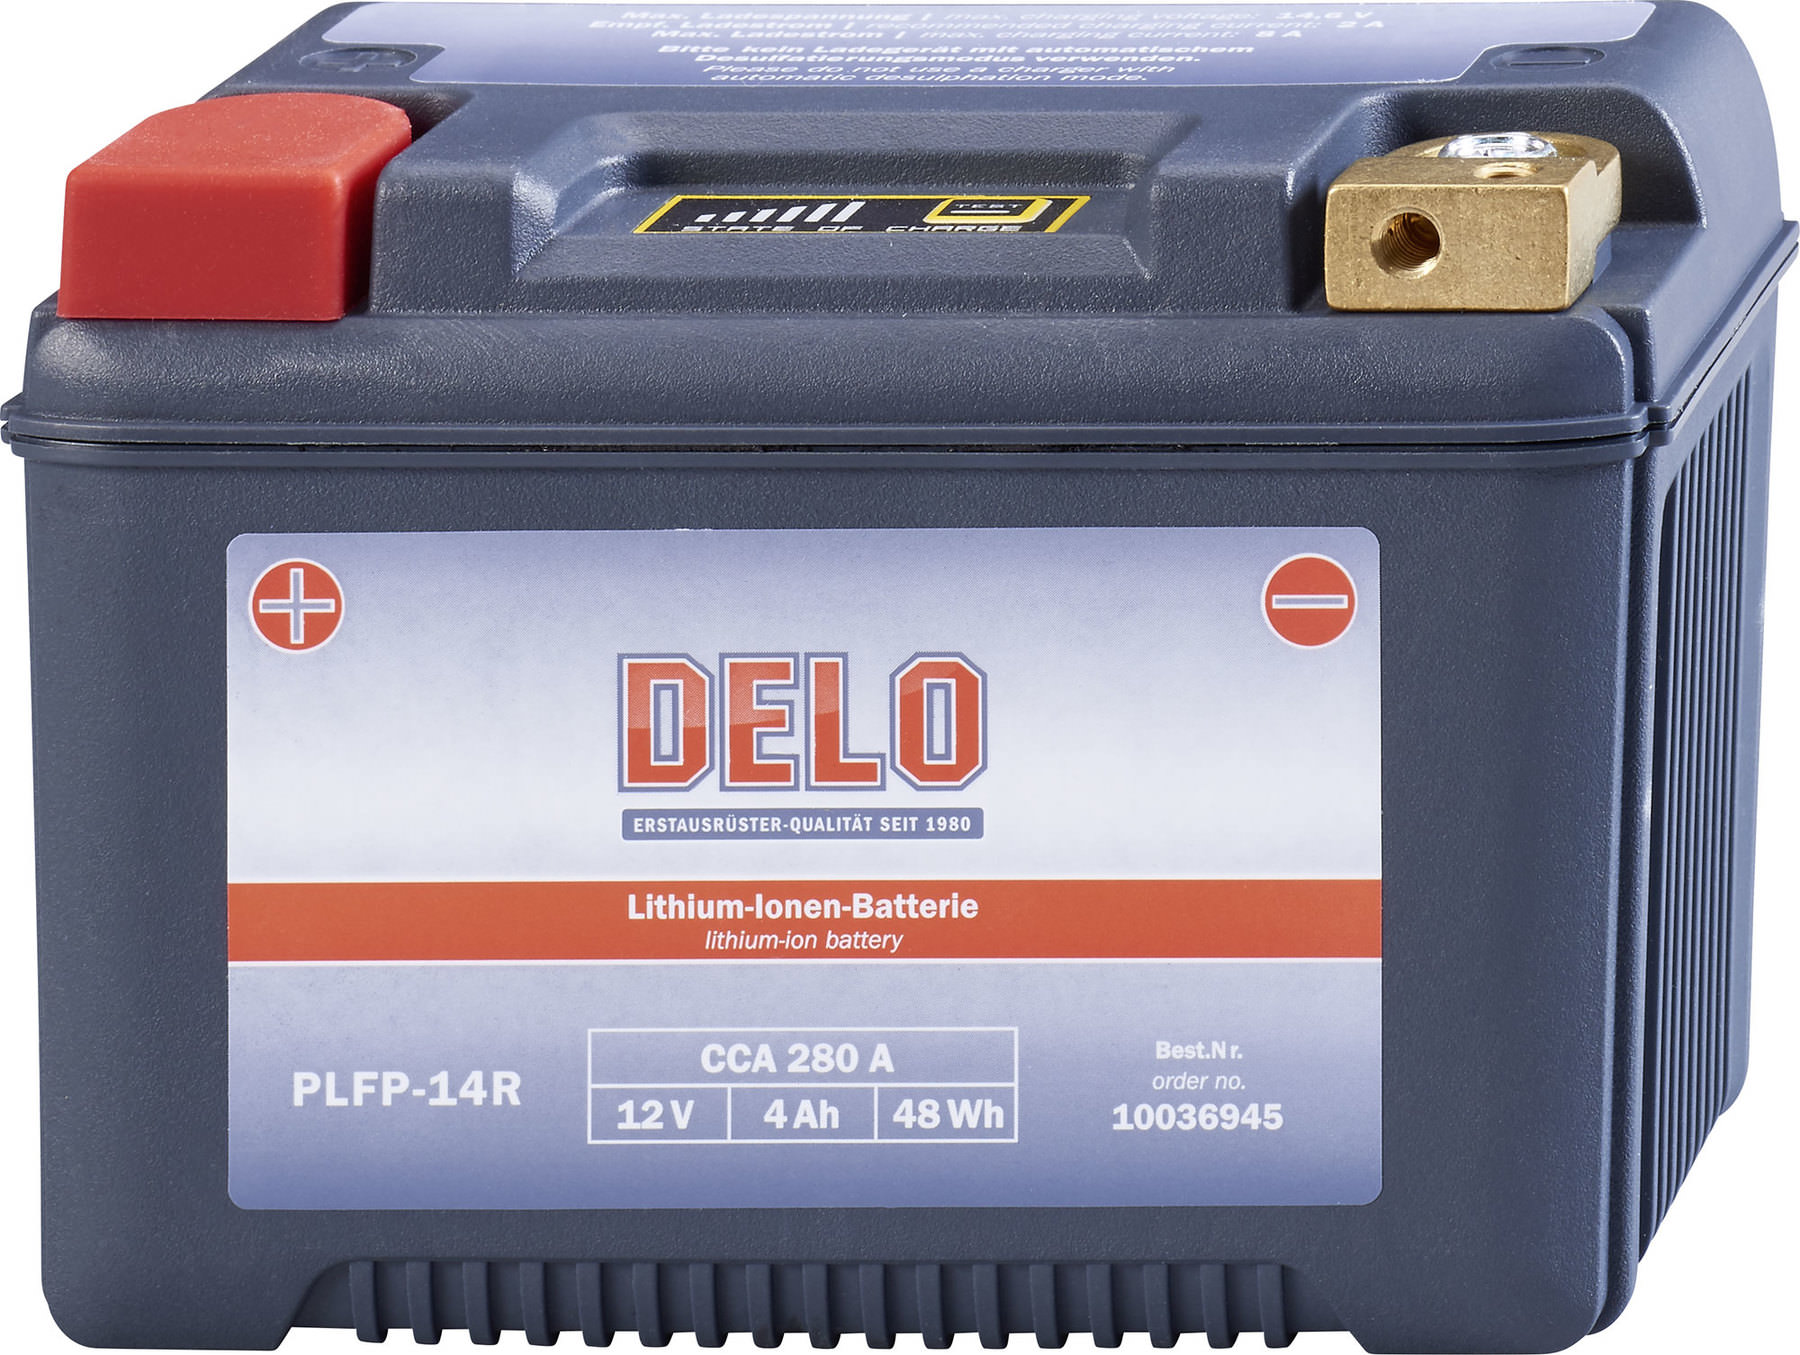 DELO LITHIUM-ION BATTERY PLFP-14R 12V/4AH,CCA 280A Louis motorcycle clothing and technology